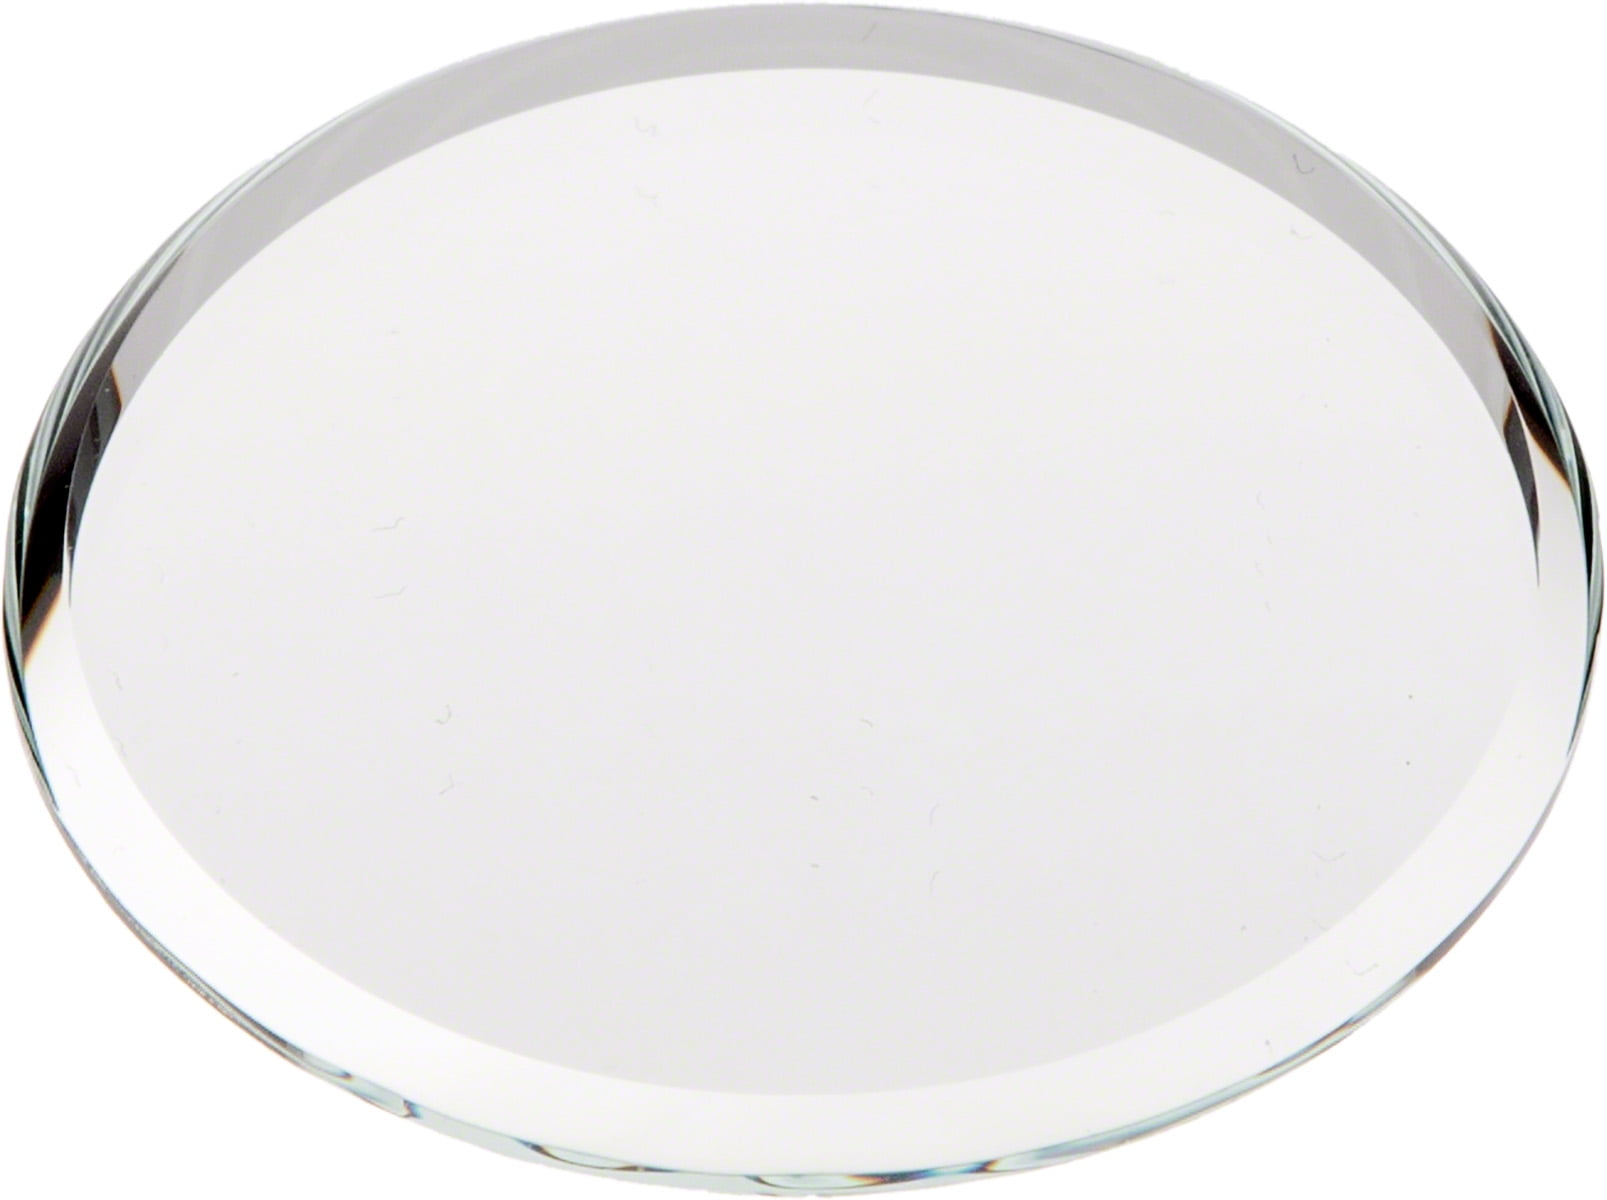 1.5 inch x 1.5 inch Pack of 3 Plymor Round 3mm Beveled Glass Mirror 